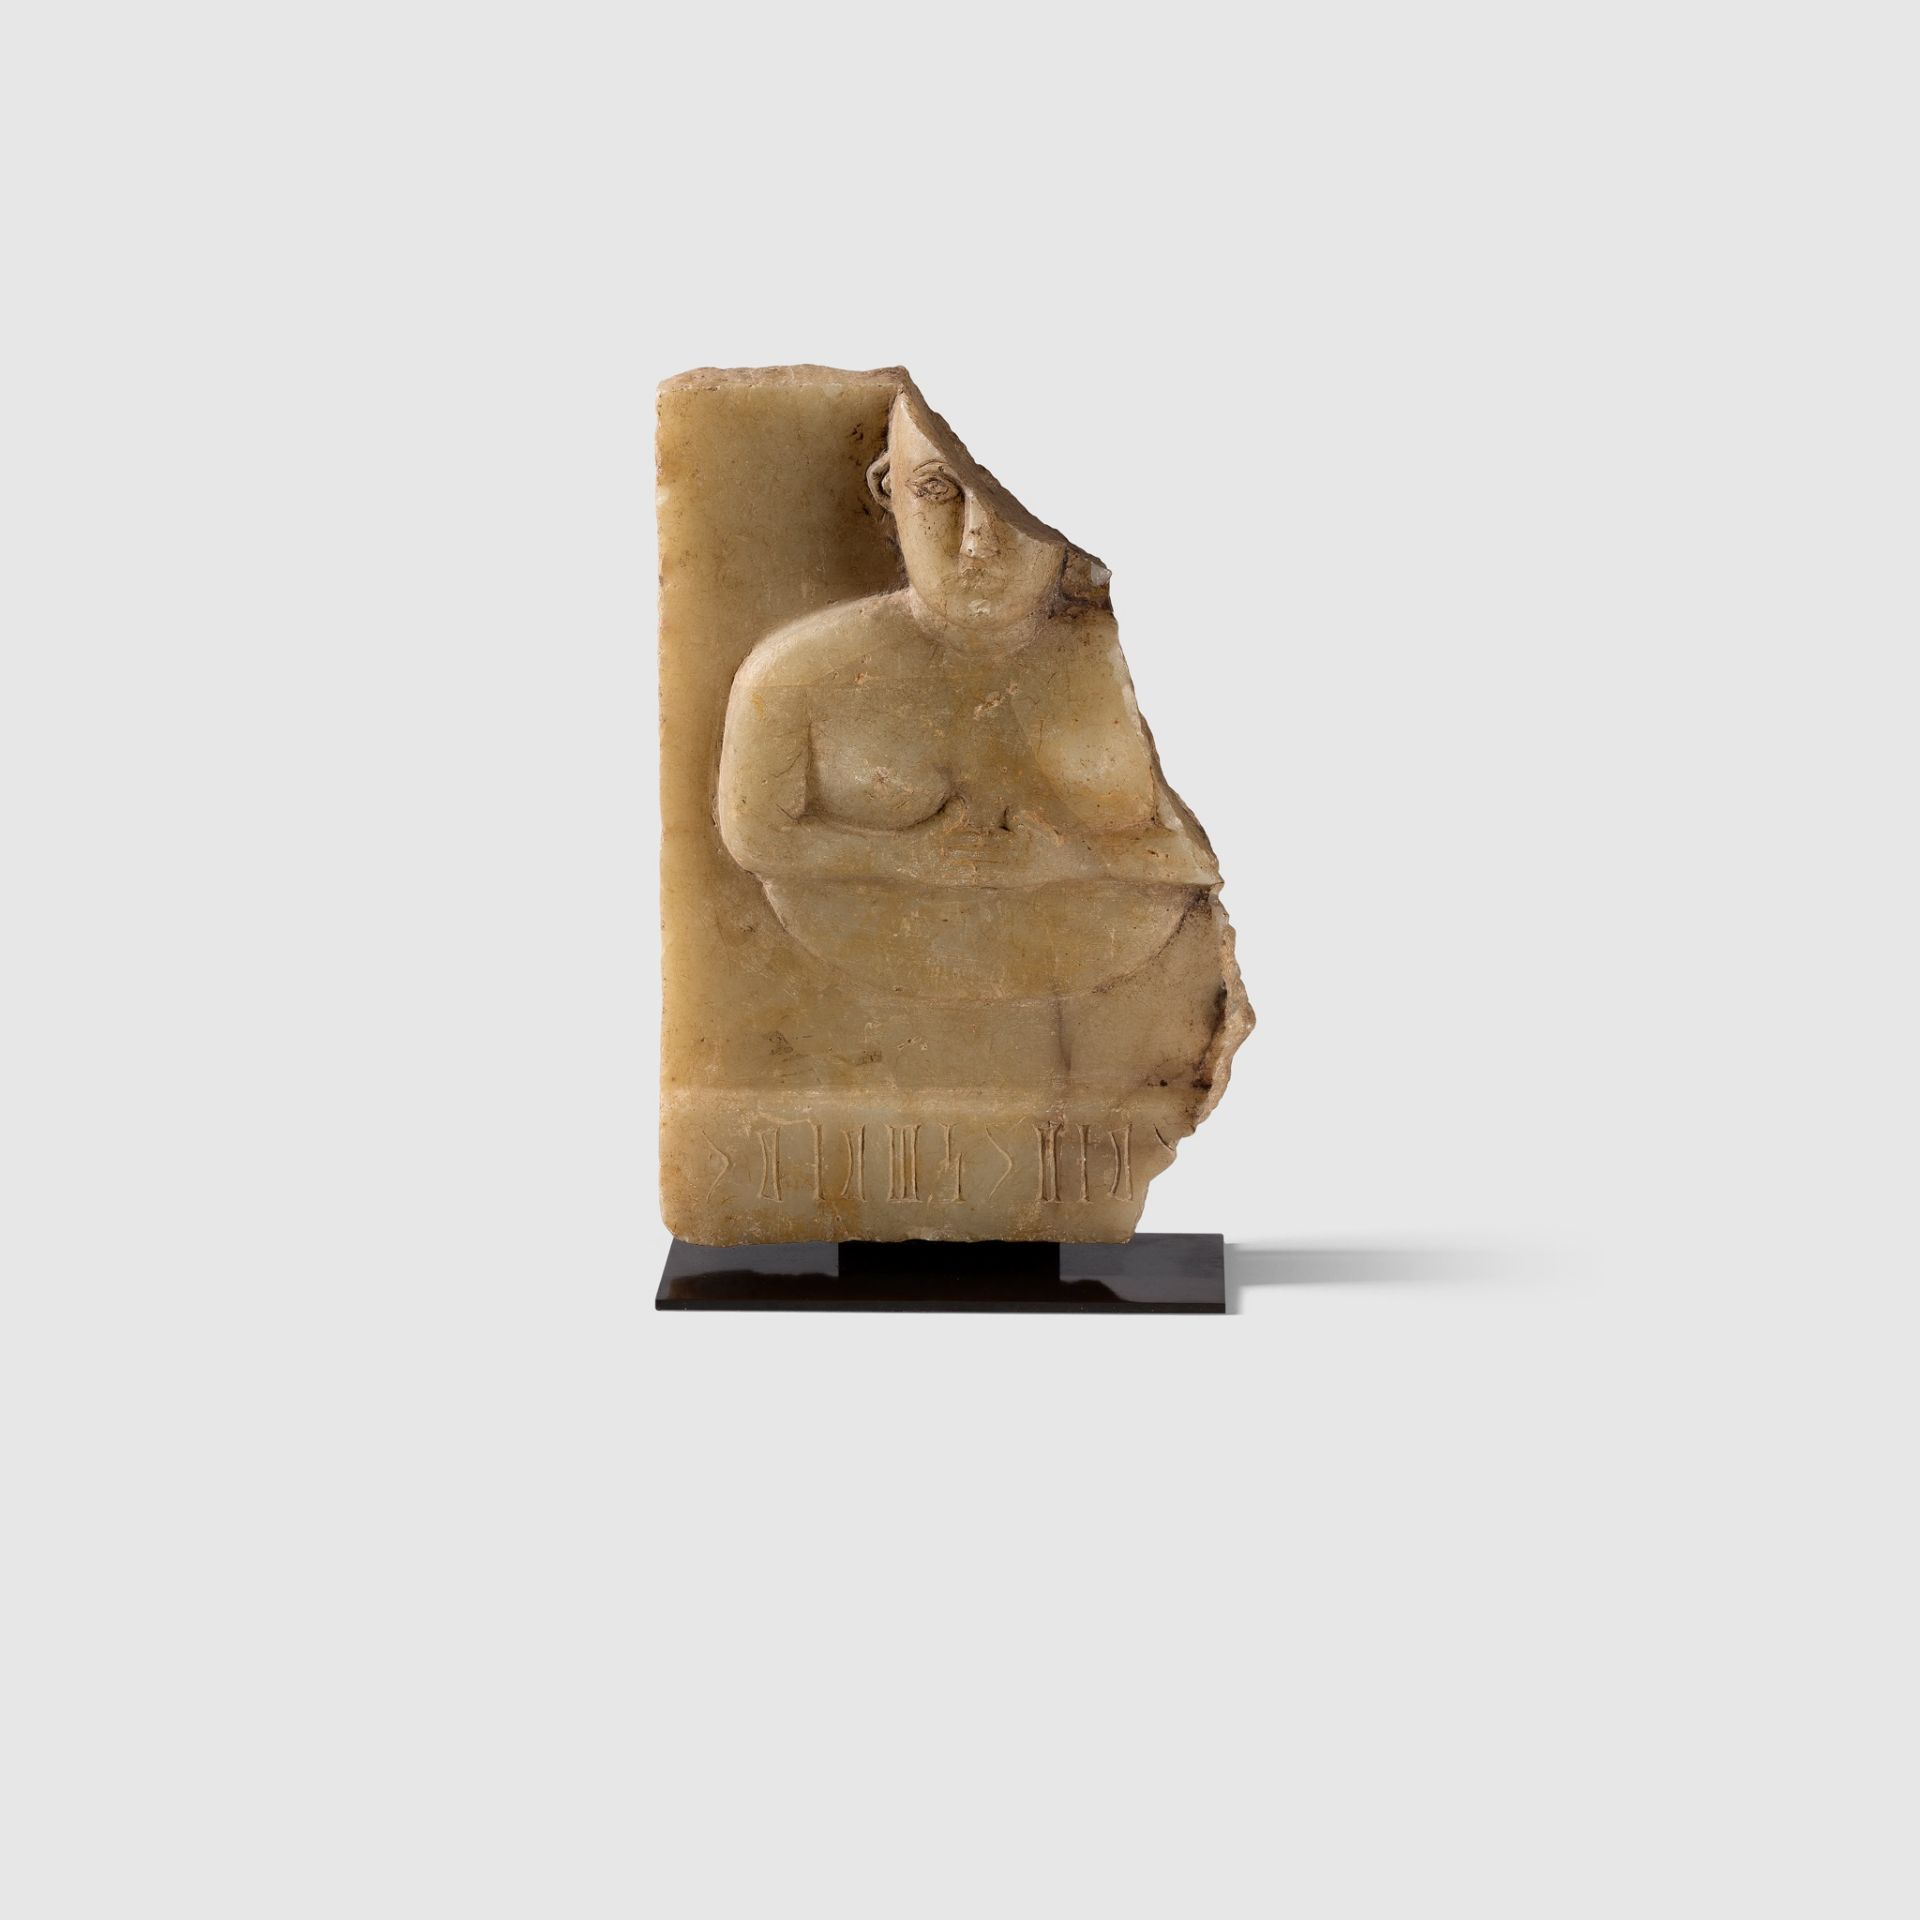 UNIQUE MONUMENT TO A PRINCESS OF BARNAT SOUTHERN ARABIA, 1ST CENTURY A.D.